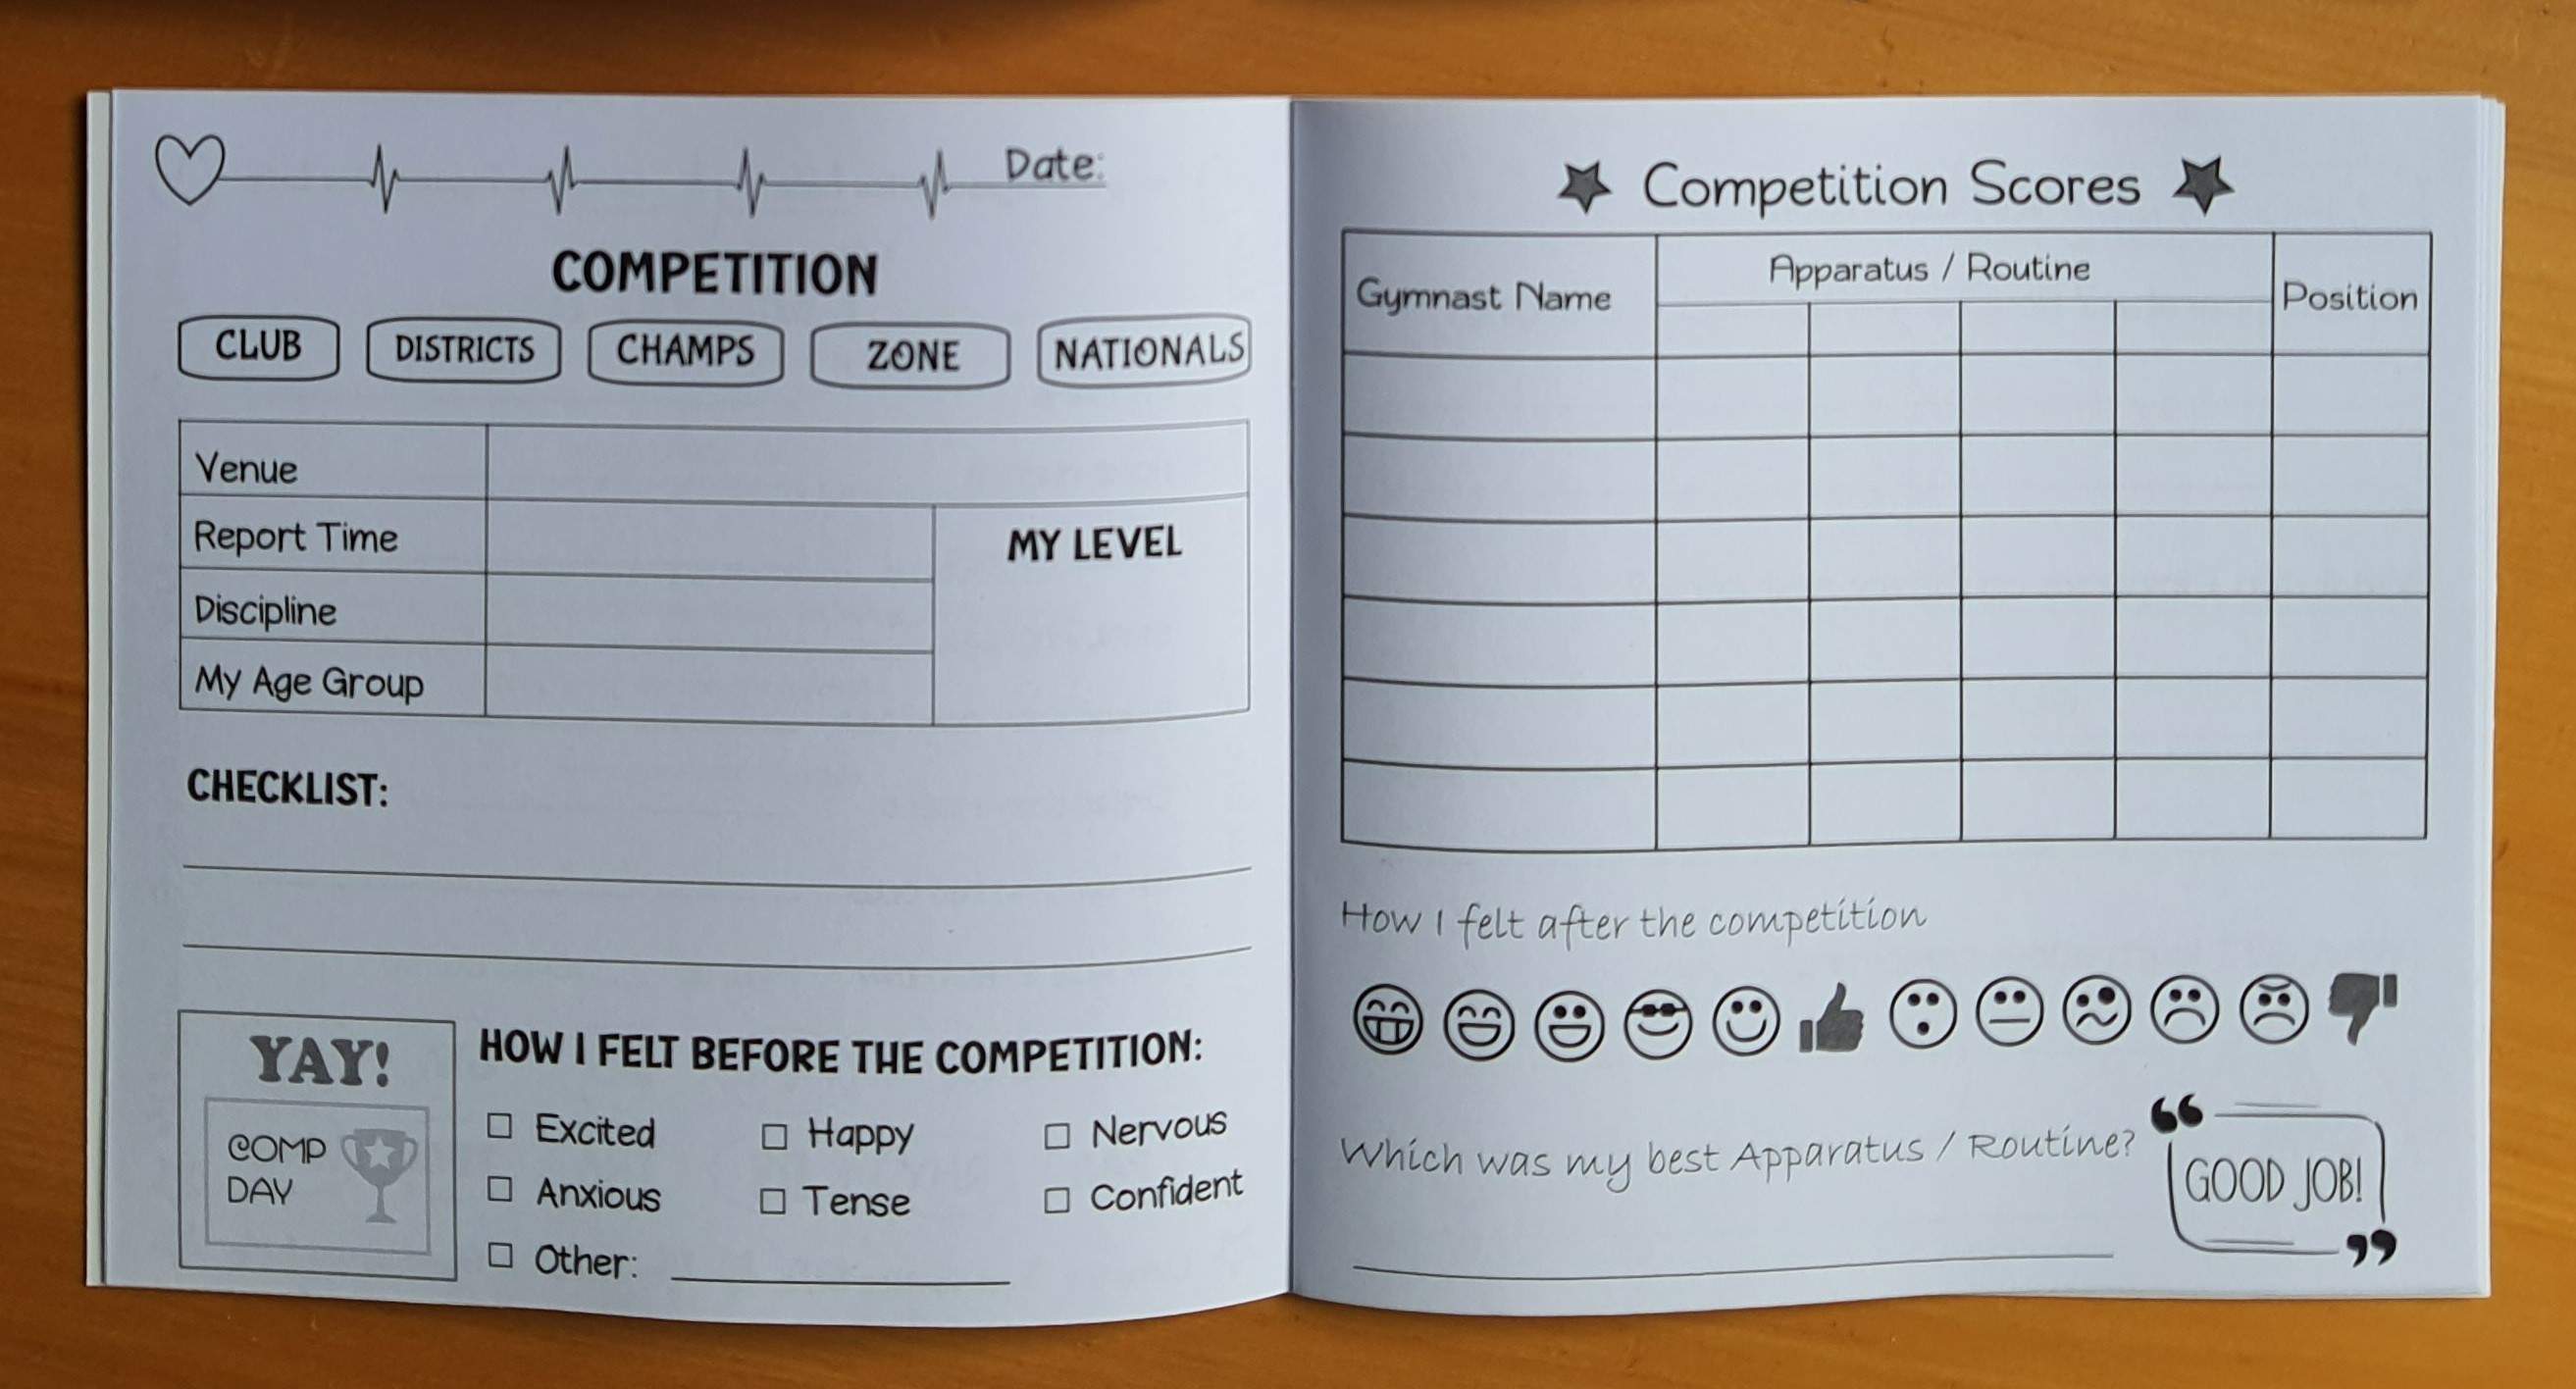 Score Book - My Competitions